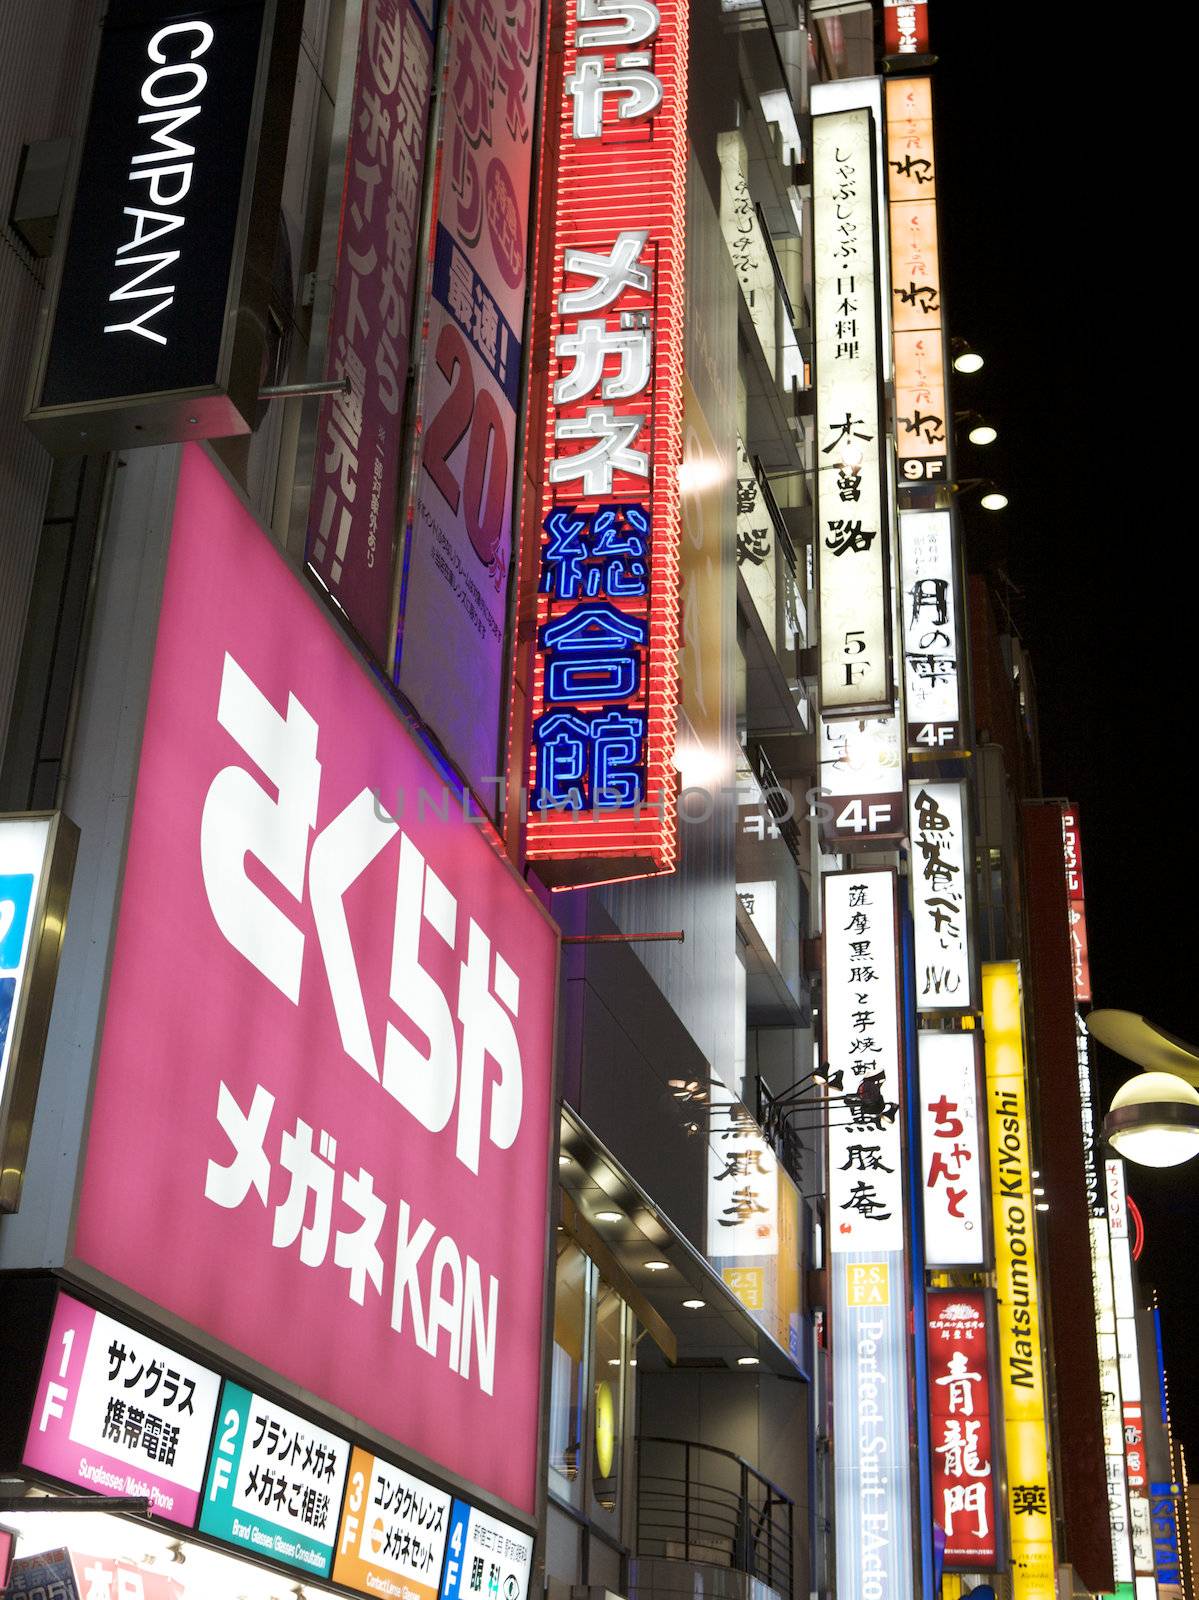 Tokyo Shops Signs at Night for Shopping